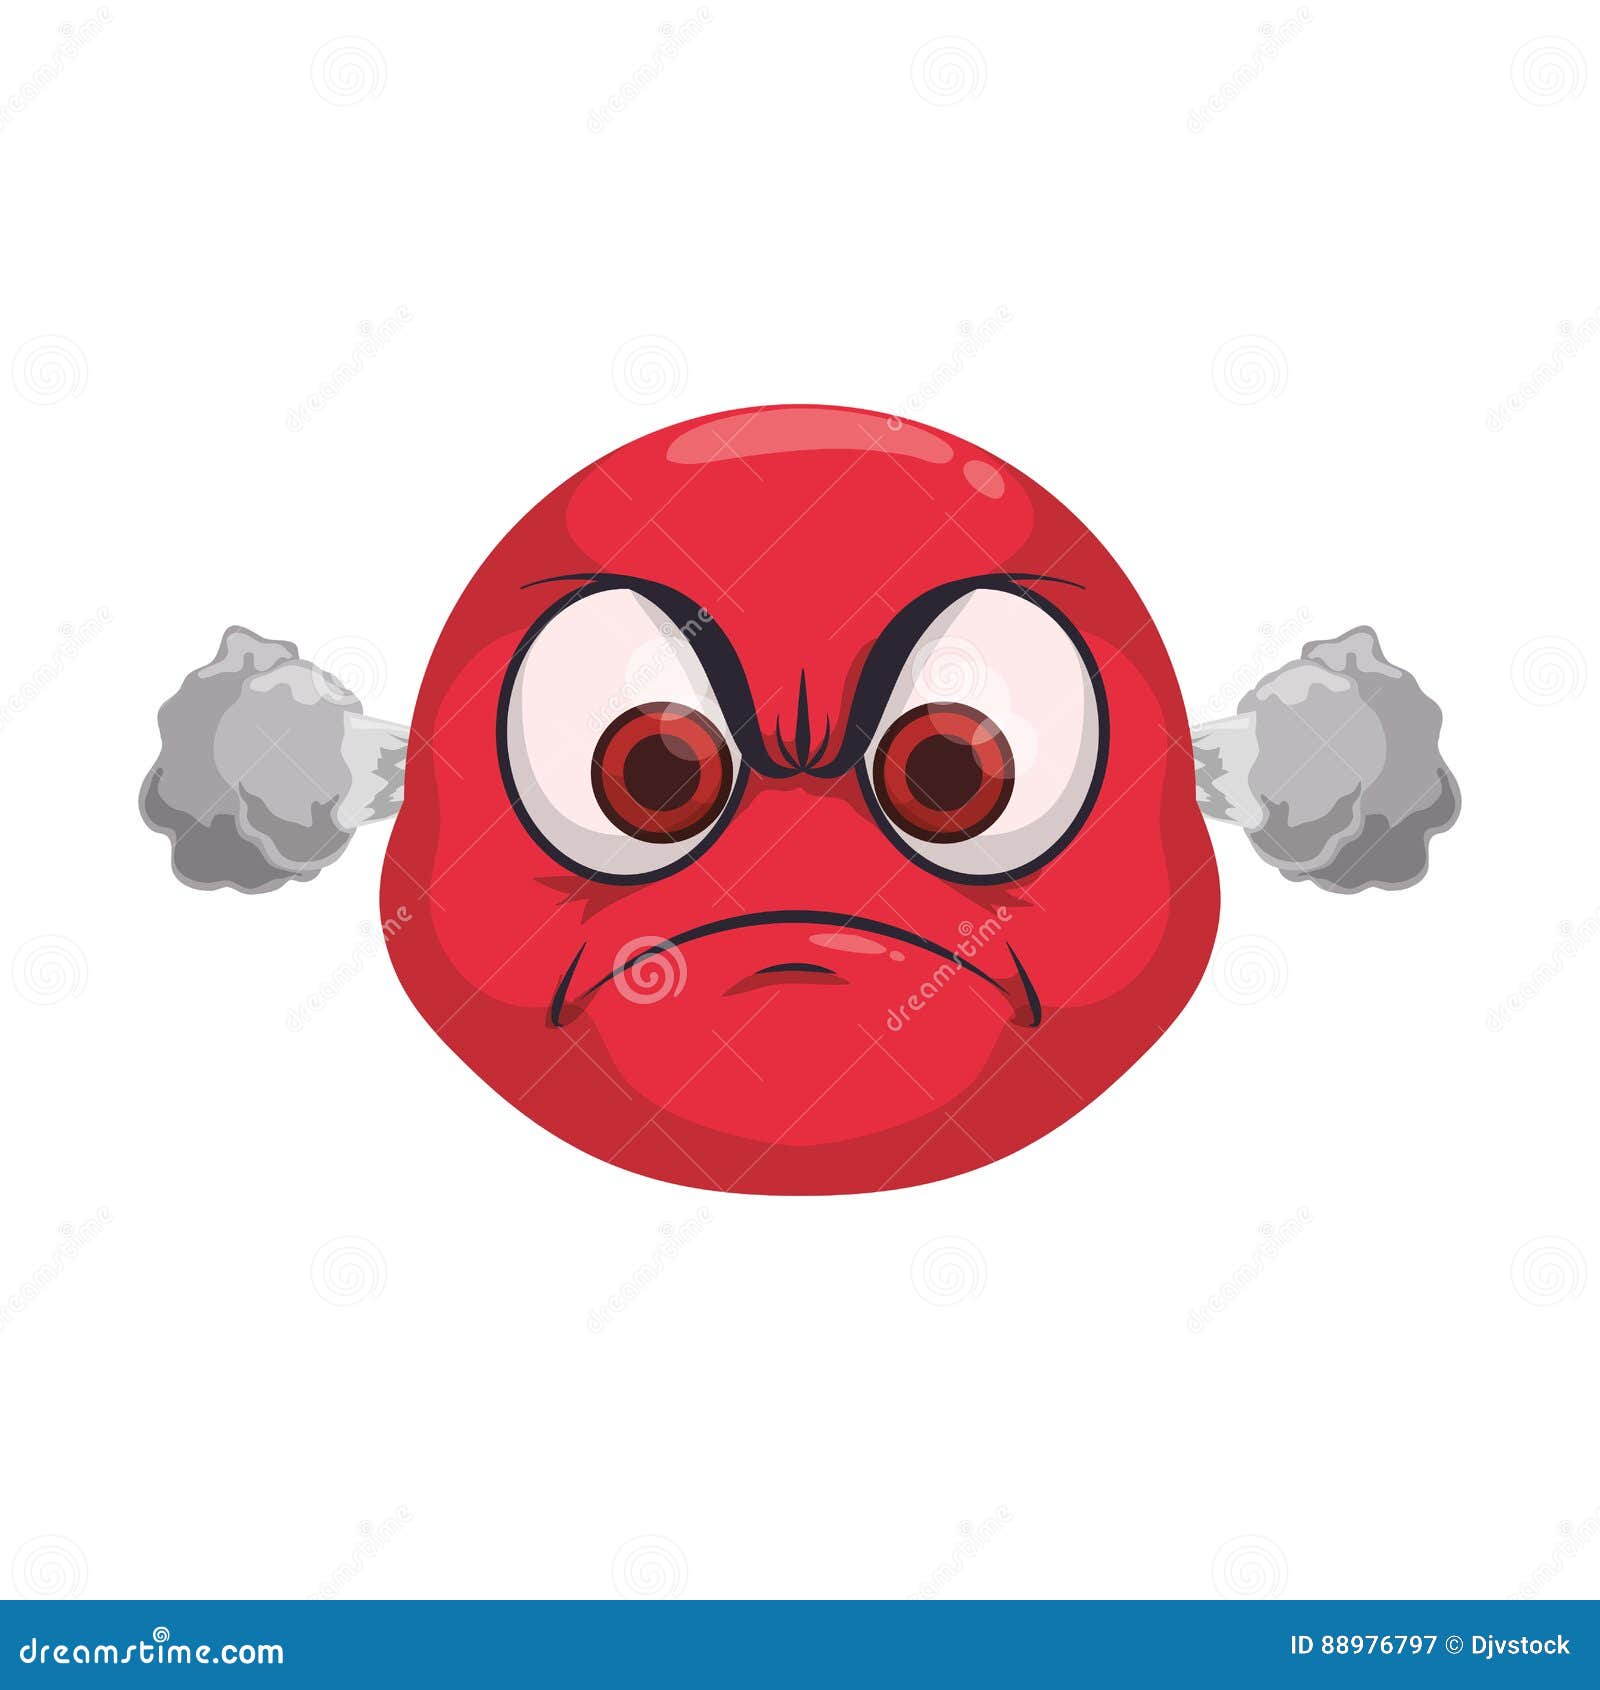 angry-cartoon-face-icon-illustration-graphic-design-88976797.jpg